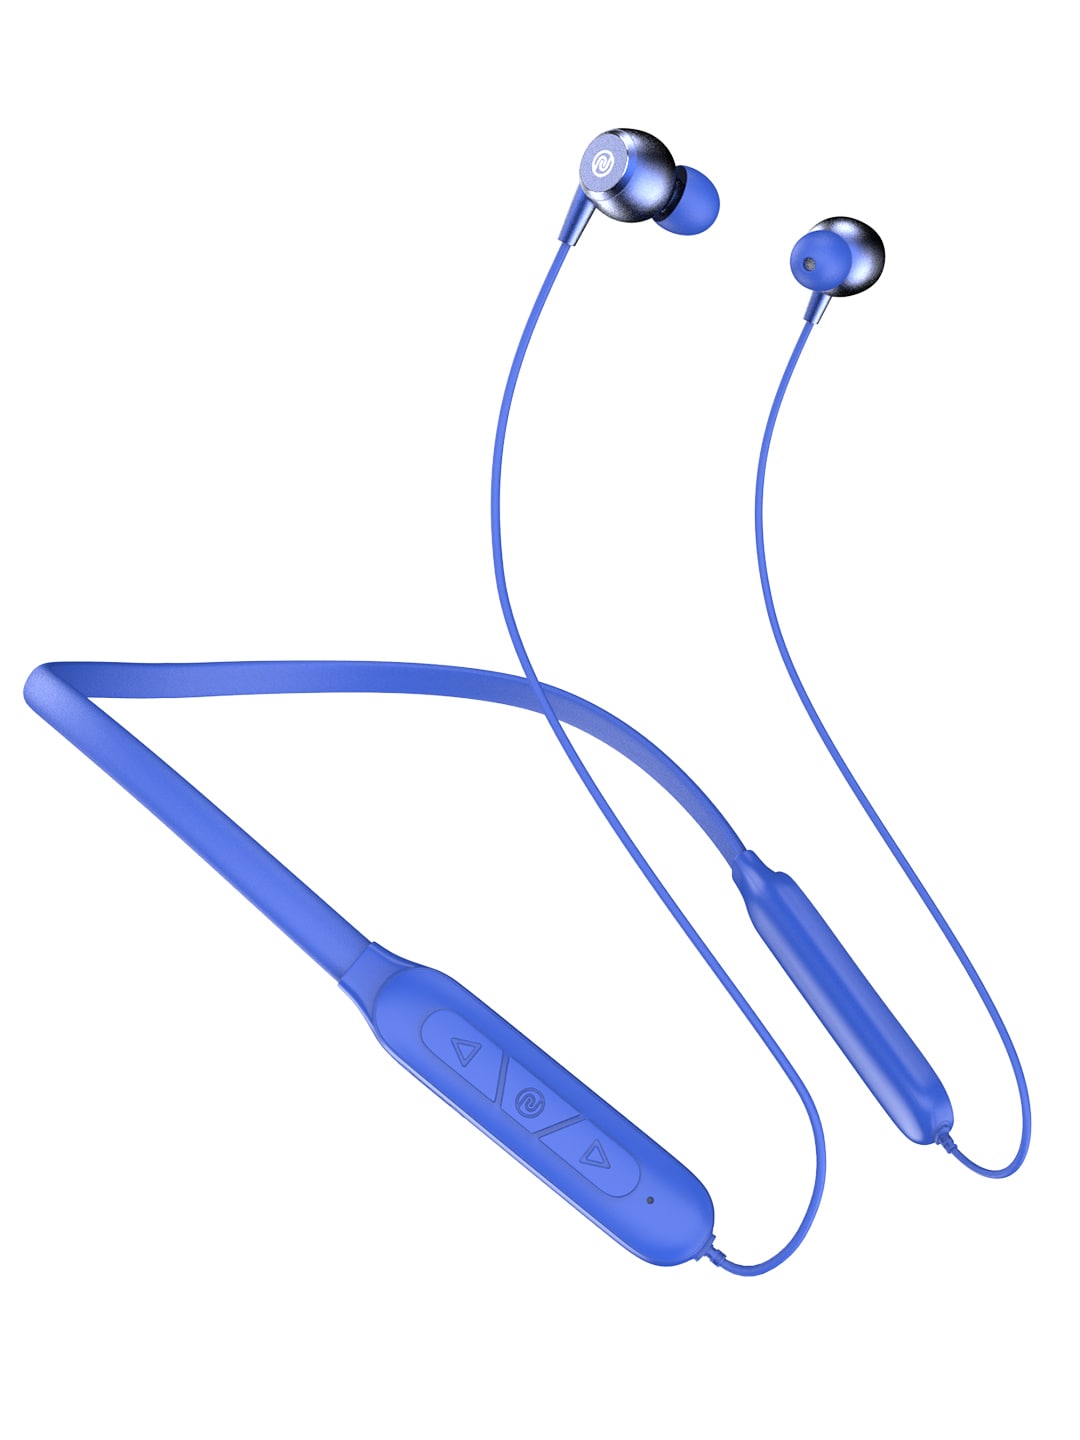 NOISE Nerve Bluetooth Wireless Neckband Earphones with Mic - Stone Blue Price in India